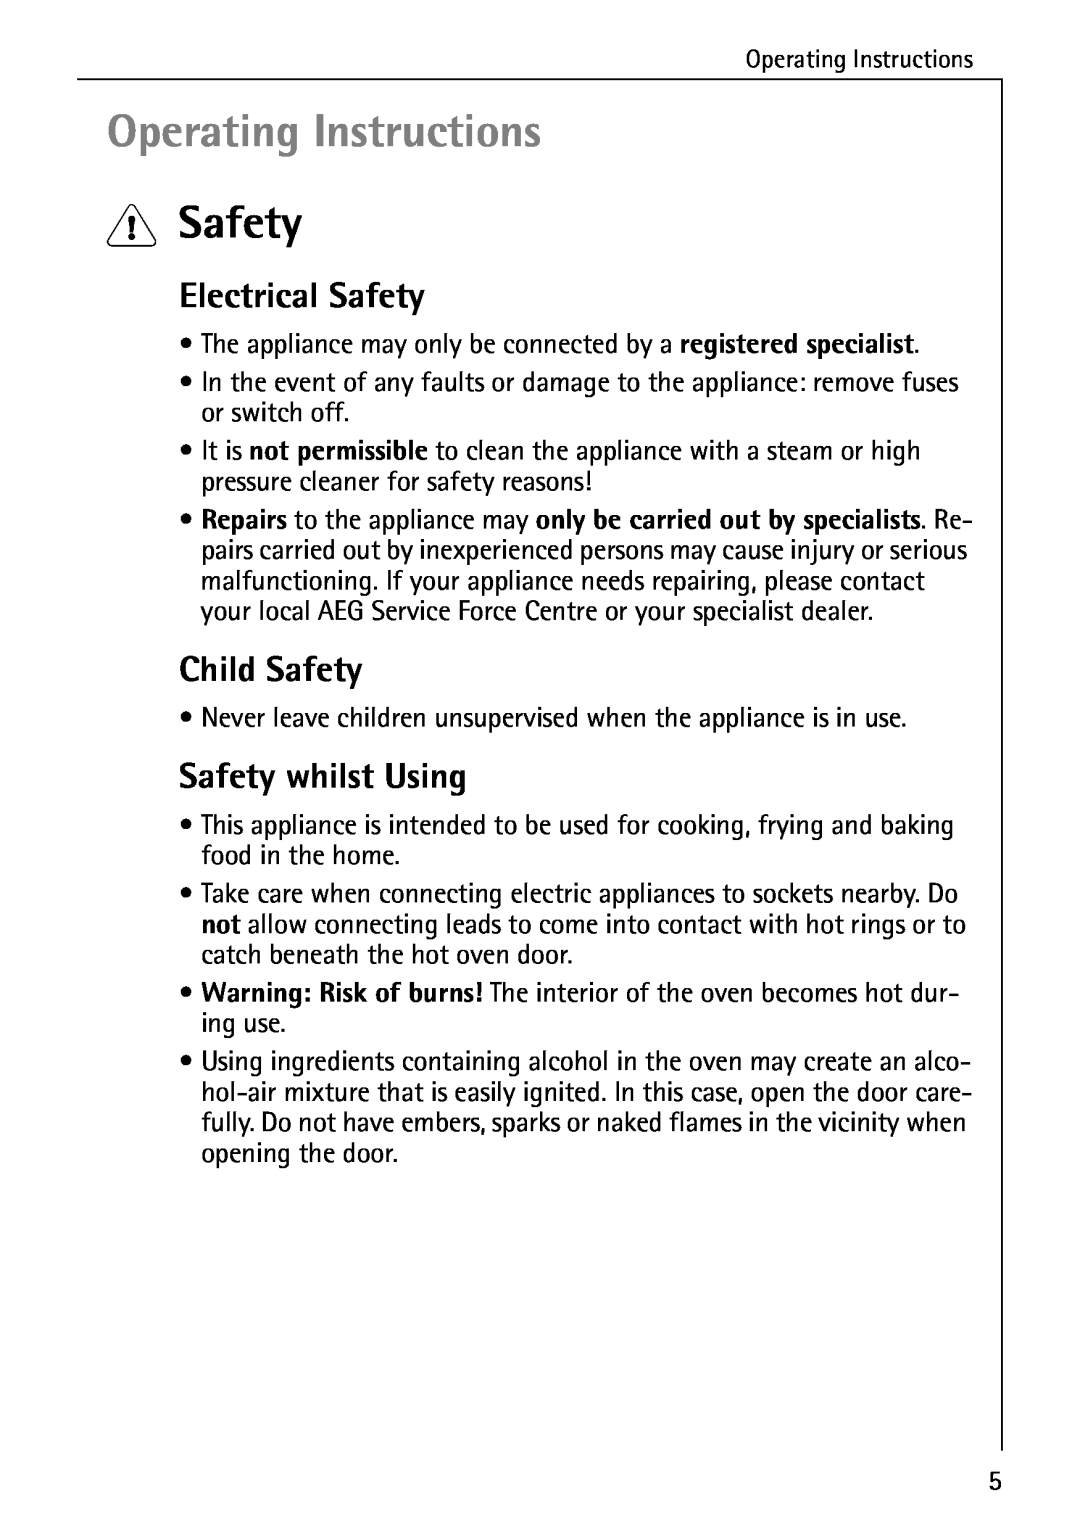 AEG E4100-1 manual Operating Instructions, 1Safety, Electrical Safety, Child Safety, Safety whilst Using 